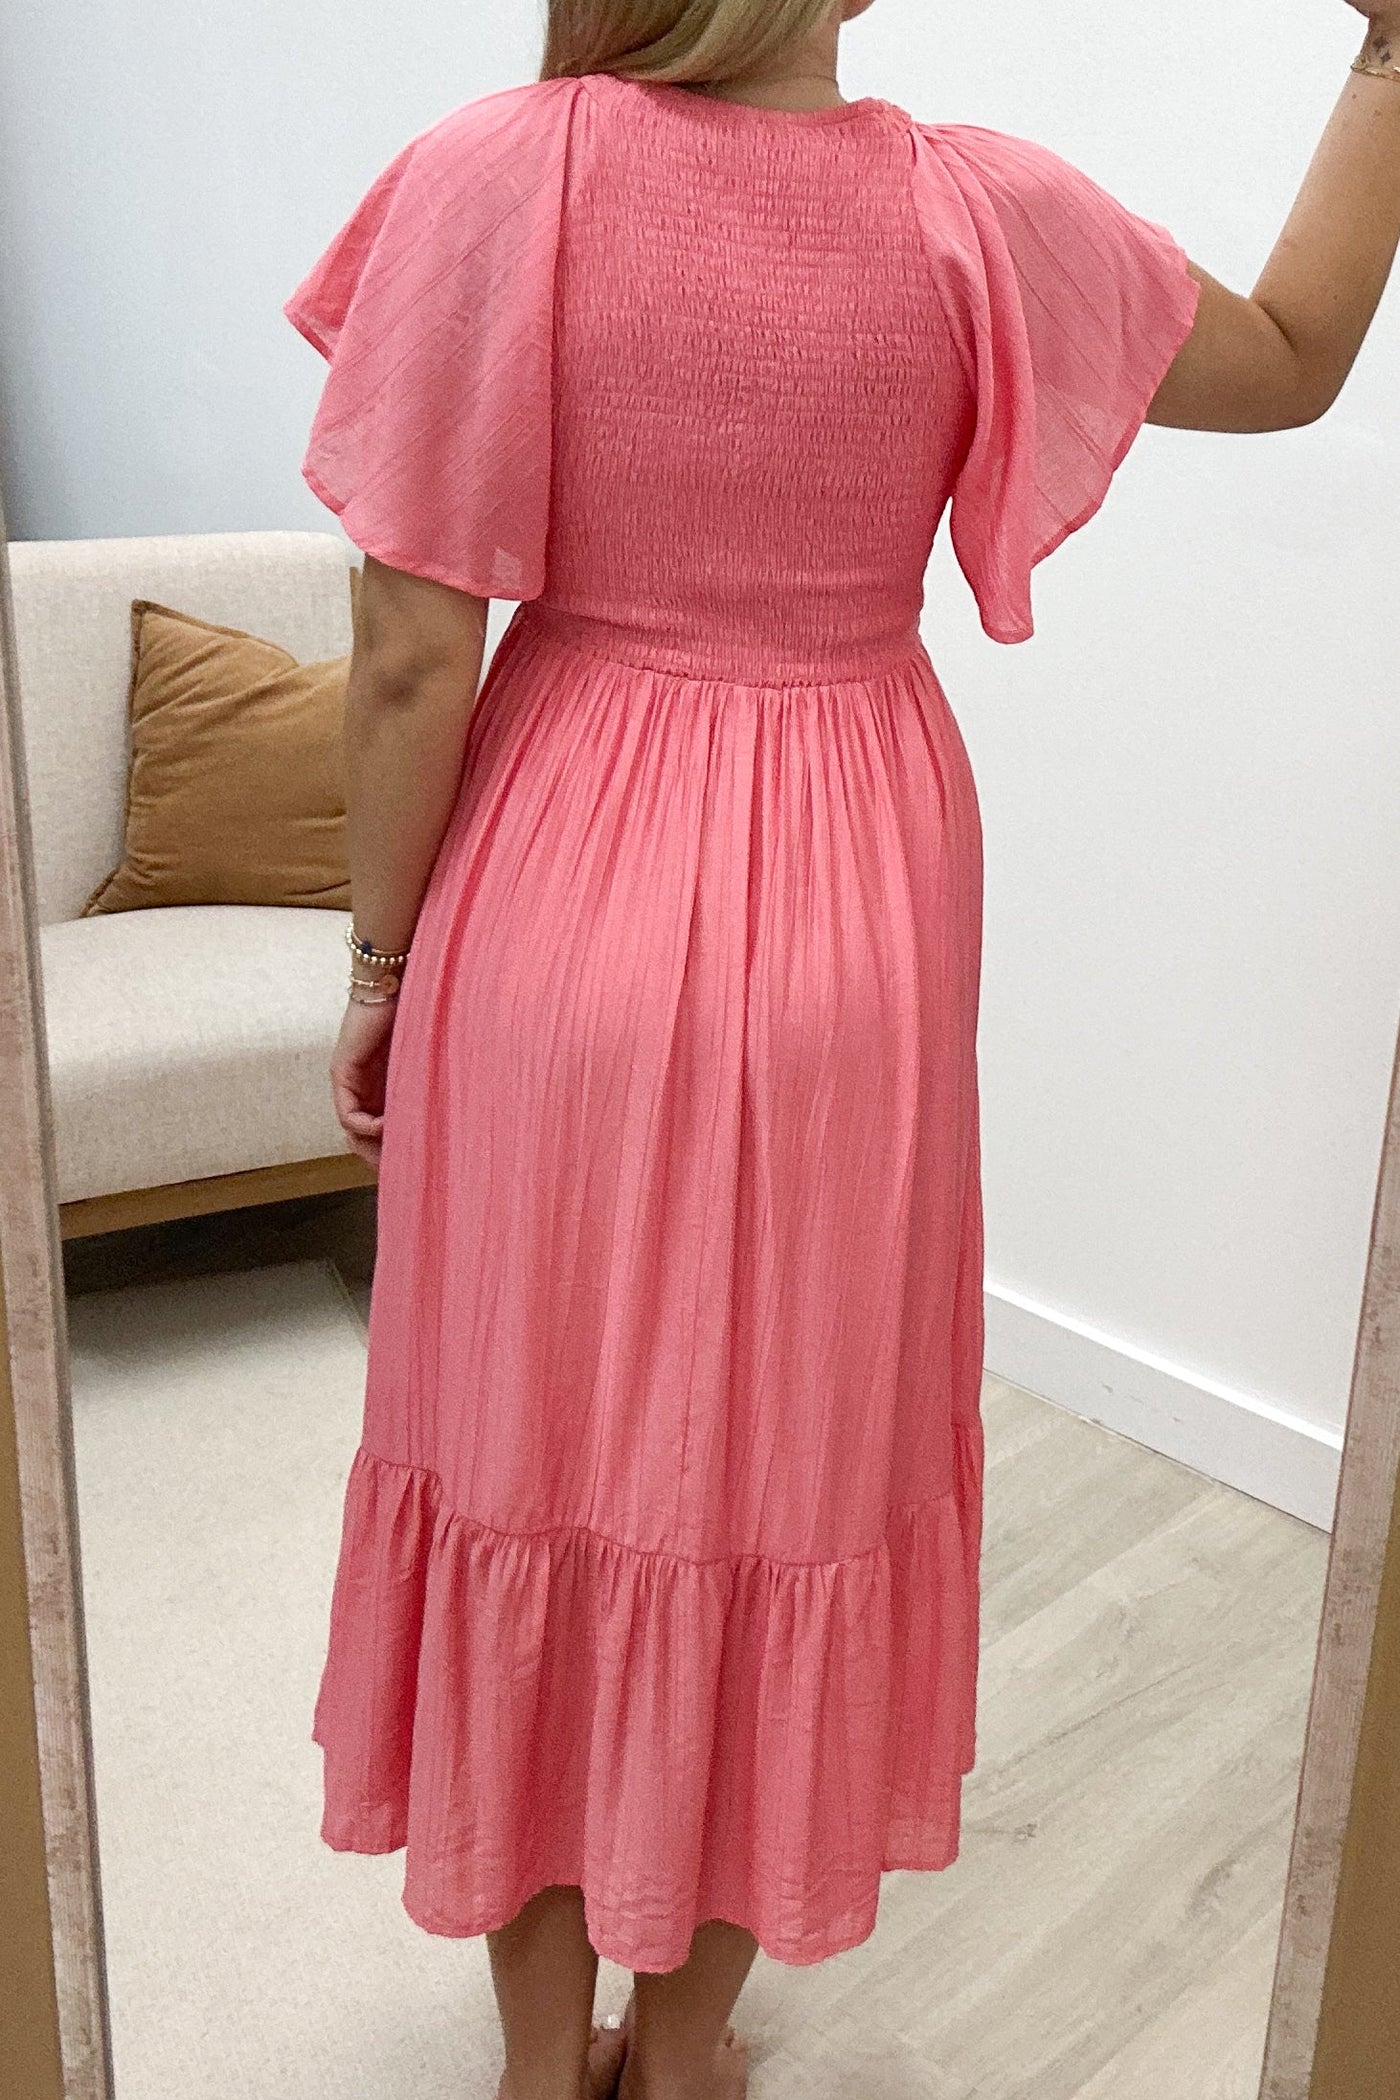 "Enjoying The View" Midi Dress (Coral) - Happily Ever Aften